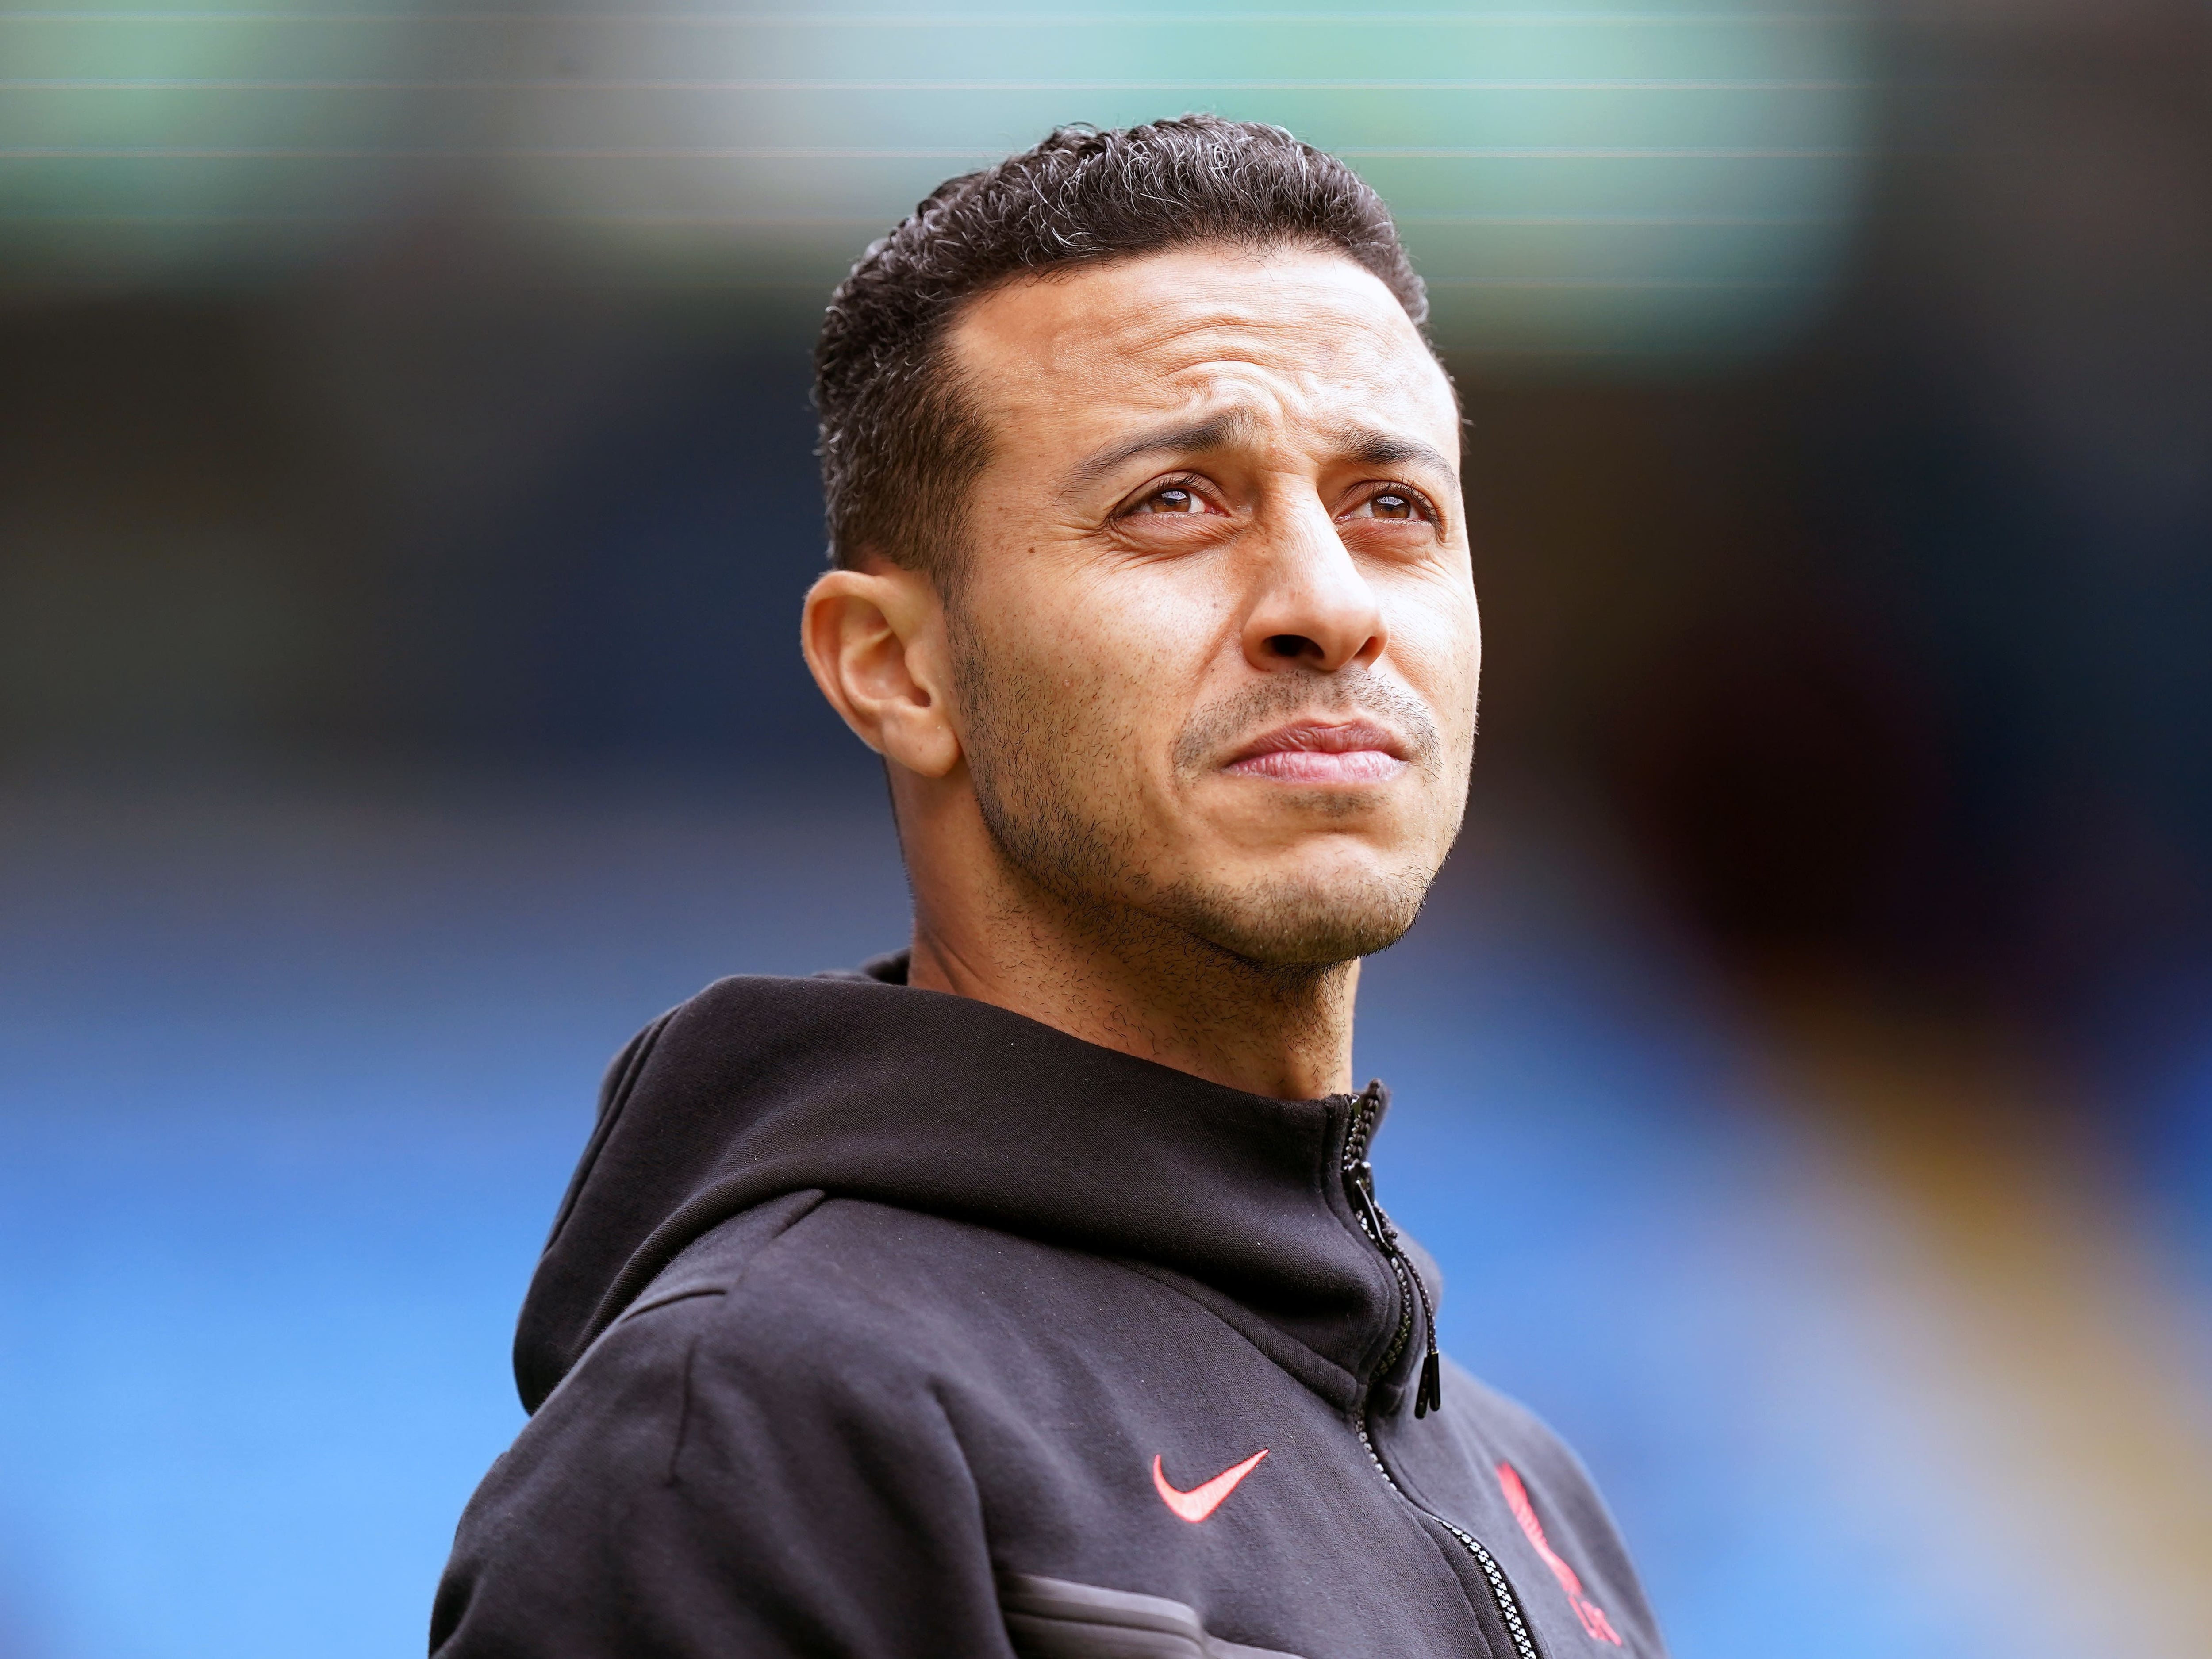 Former Liverpool and Spain midfielder Thiago Alcantara retires at age of 33